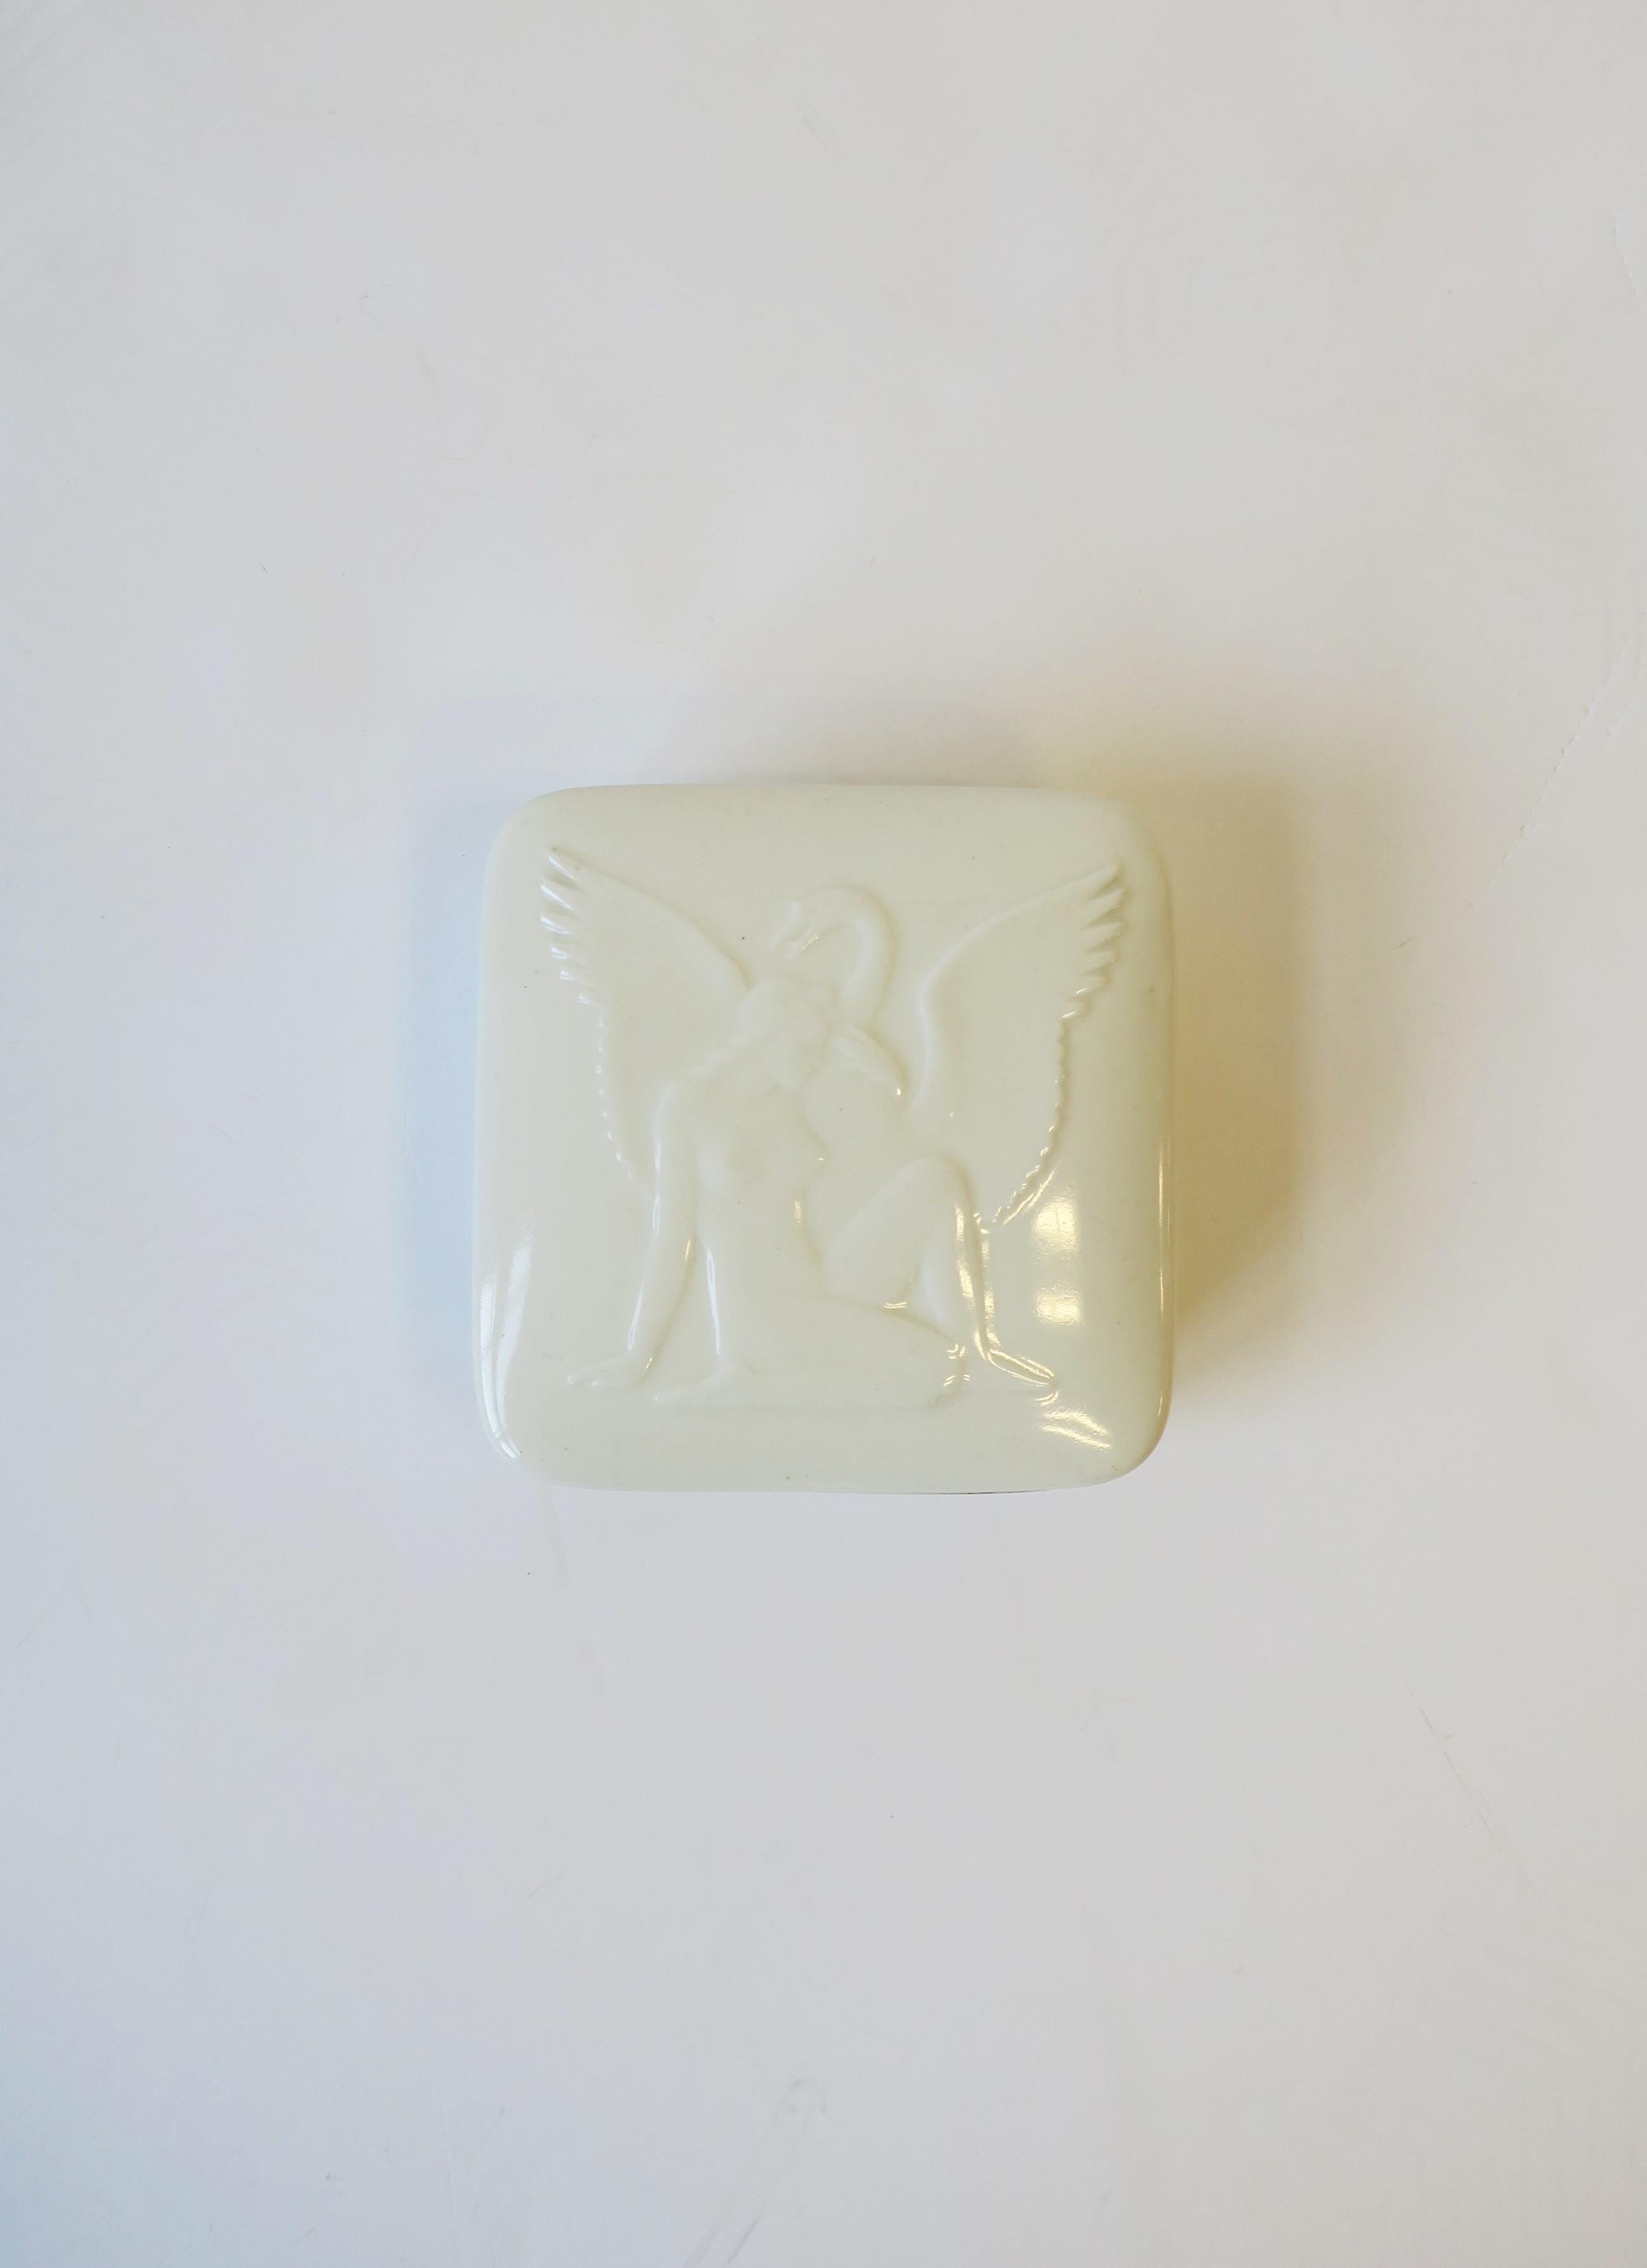 A beautiful white porcelain box with female figure and swan bird design by Royal Copenhagen, Art Deco period, Denmark, circa early-20th century. A great piece for jewelry or other small items on a desk, vanity, nightstand table, etc., or as a